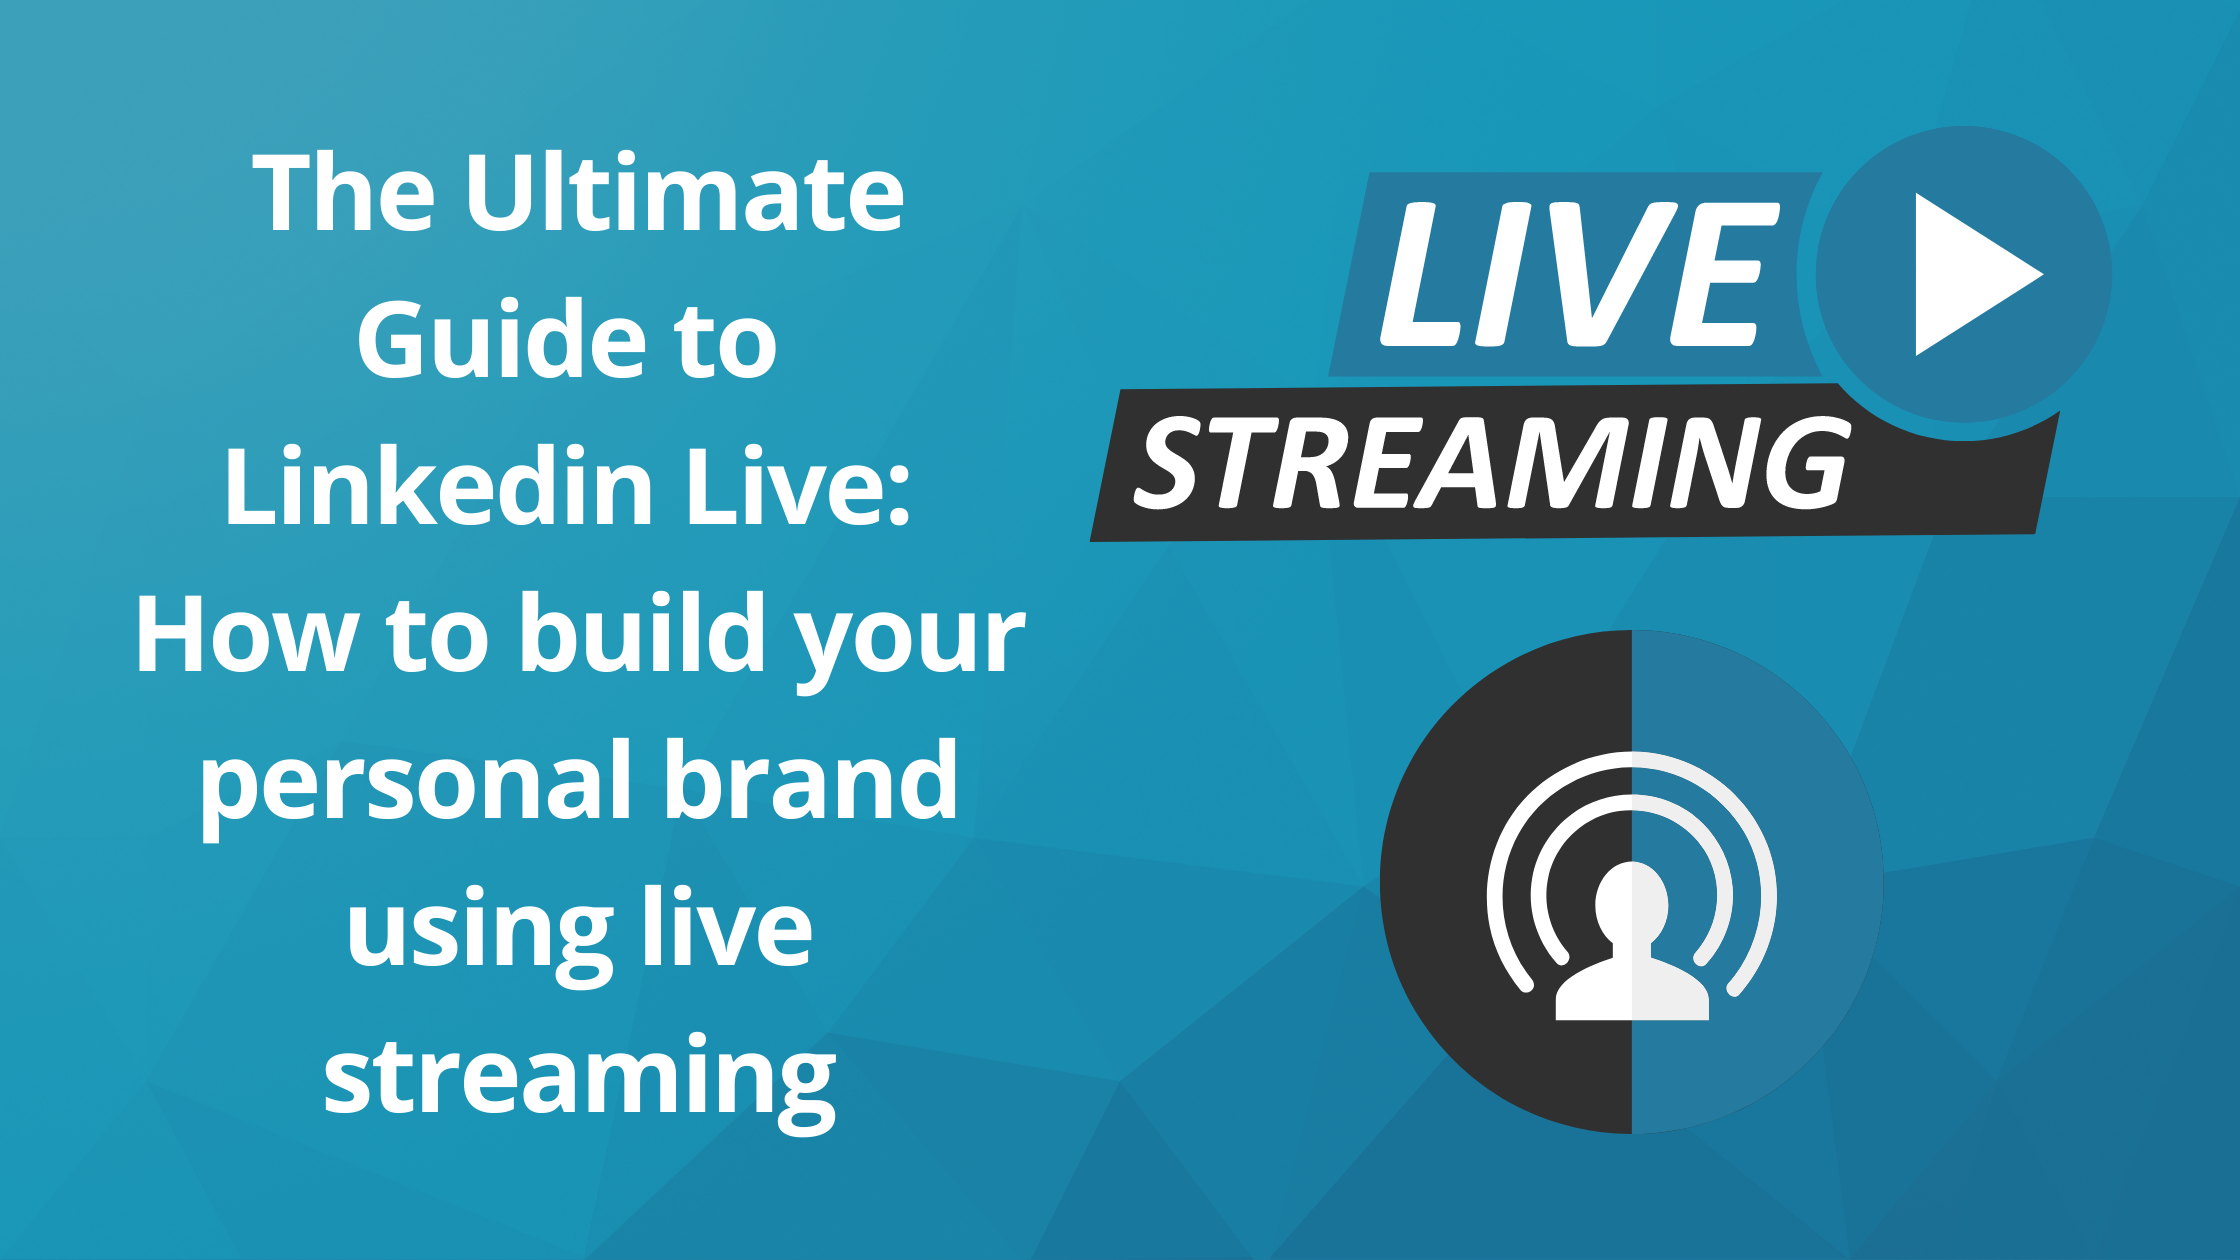 The Ultimate Guide to Linkedin Live: How to build your personal brand using live streaming